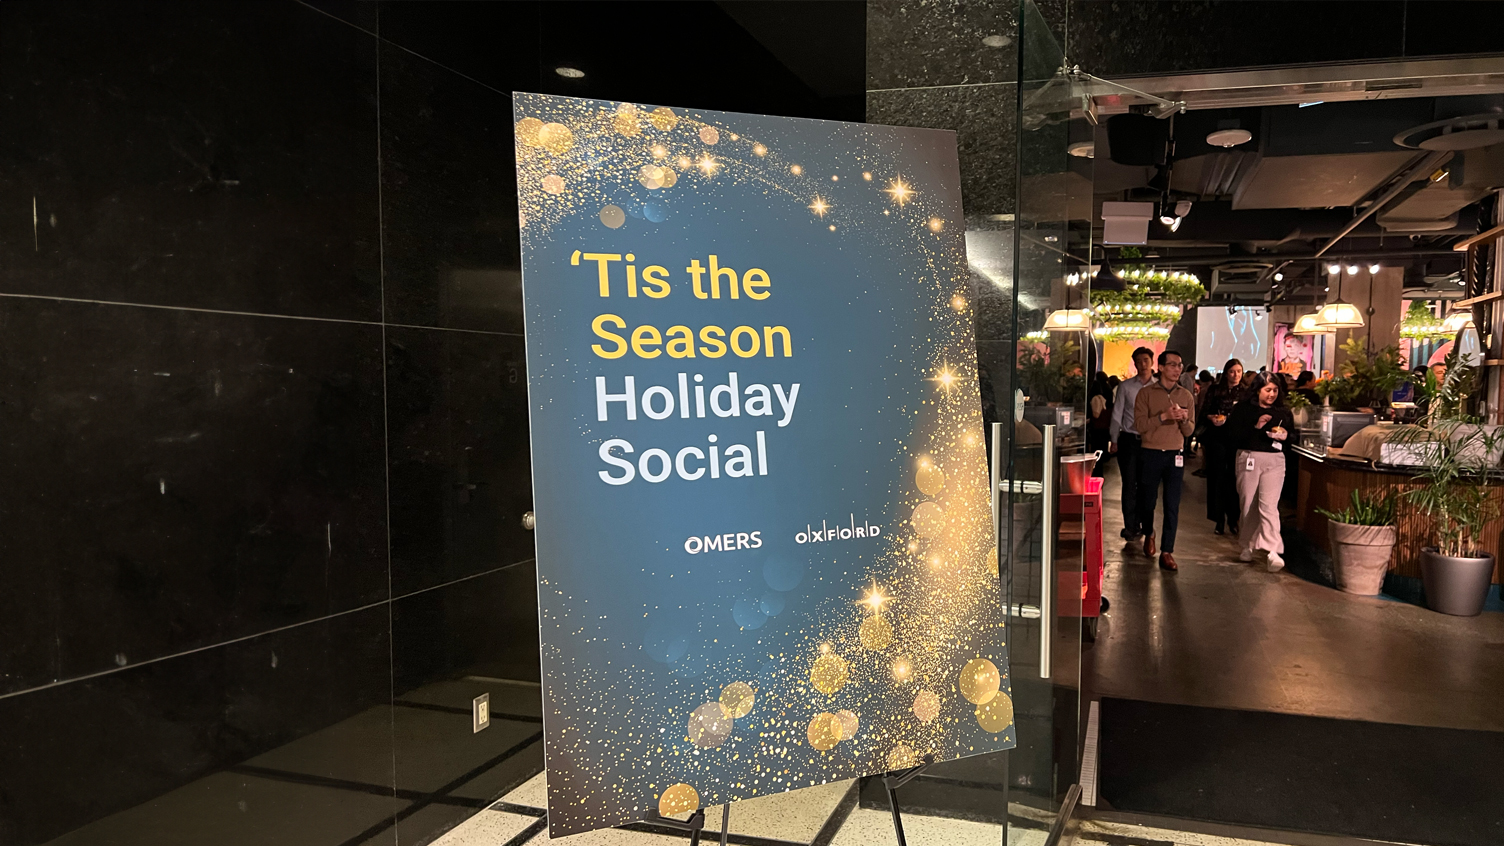 Signage for the OMERS & Oxford holiday social